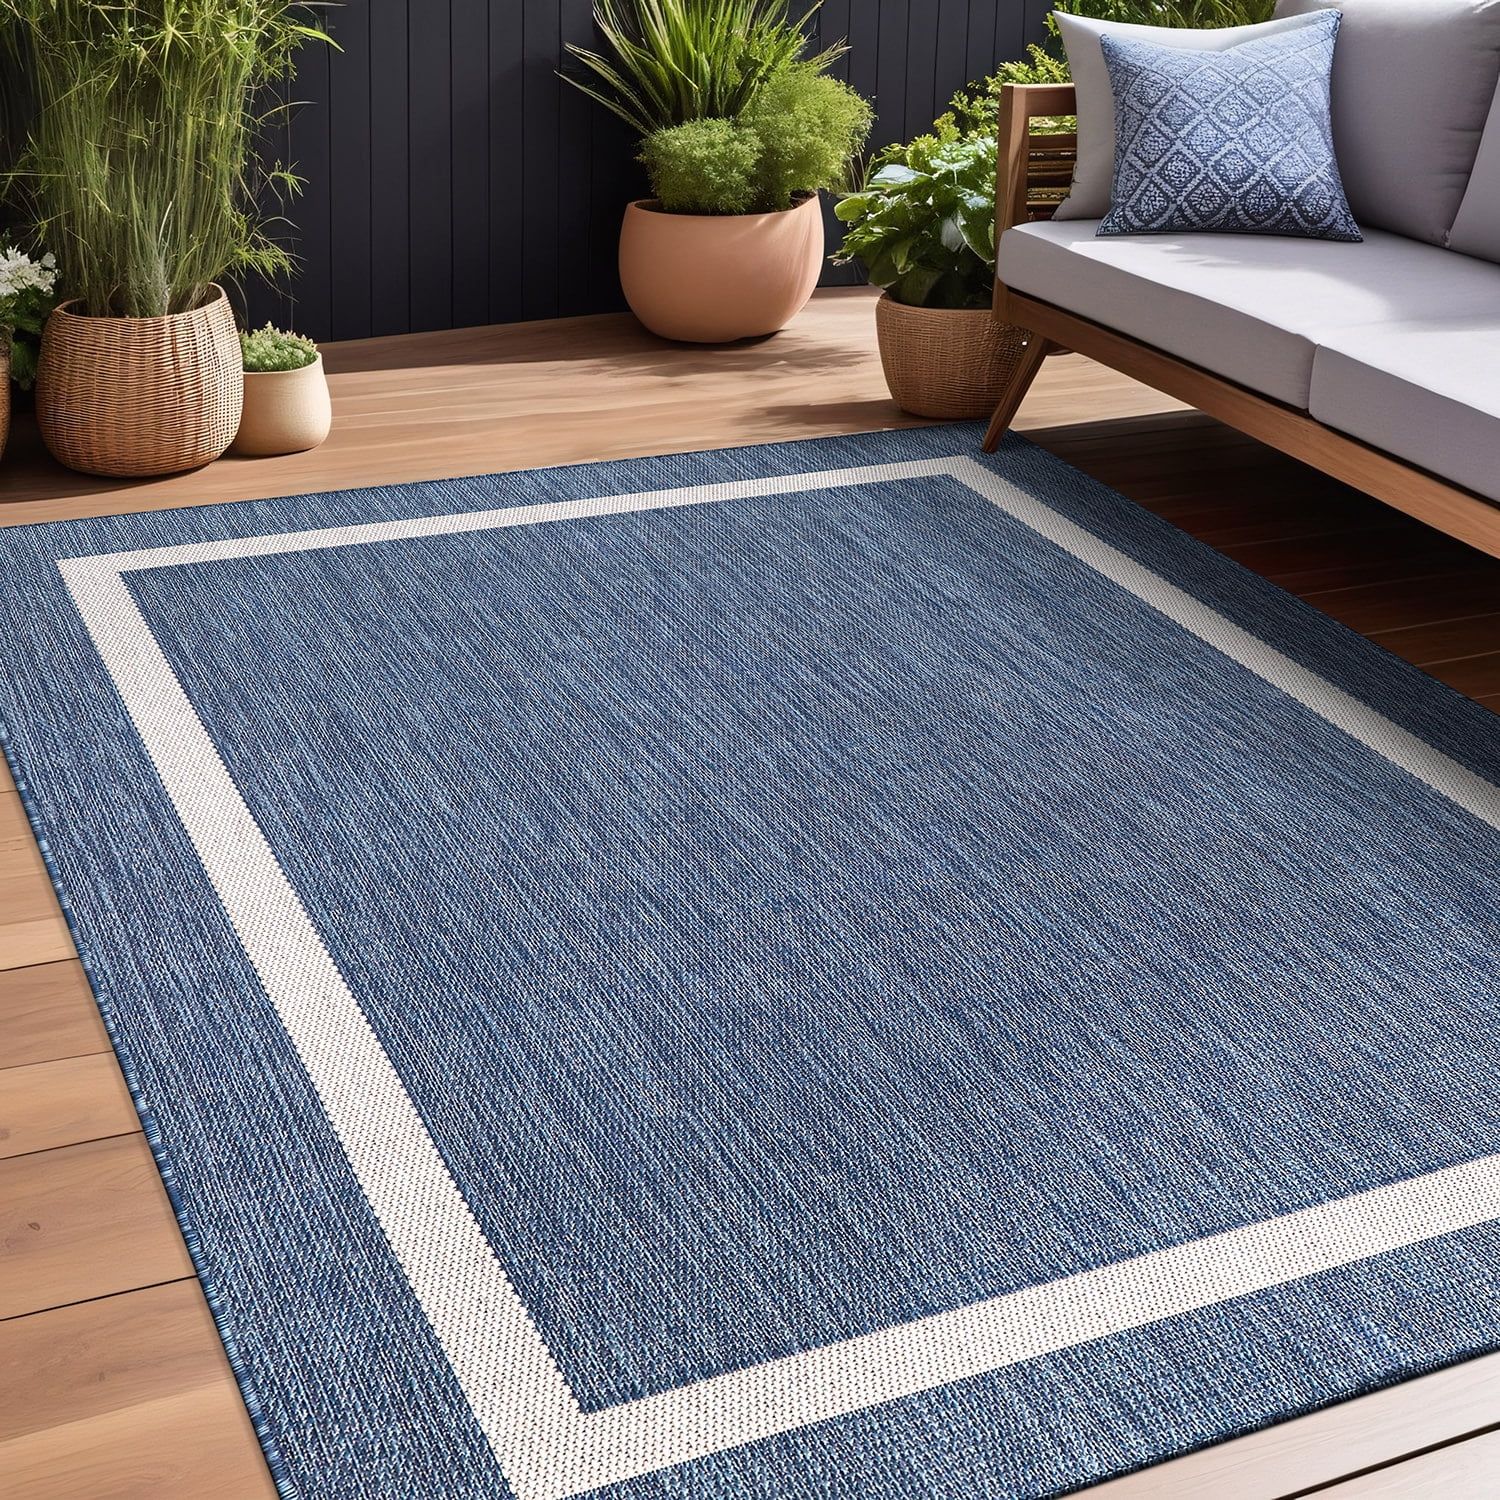 Beverly Rug Indoor/Outdoor Area Rugs, Bordered Patio Porch Garden Carpet, Blue and White, 6'x9' | Walmart (US)